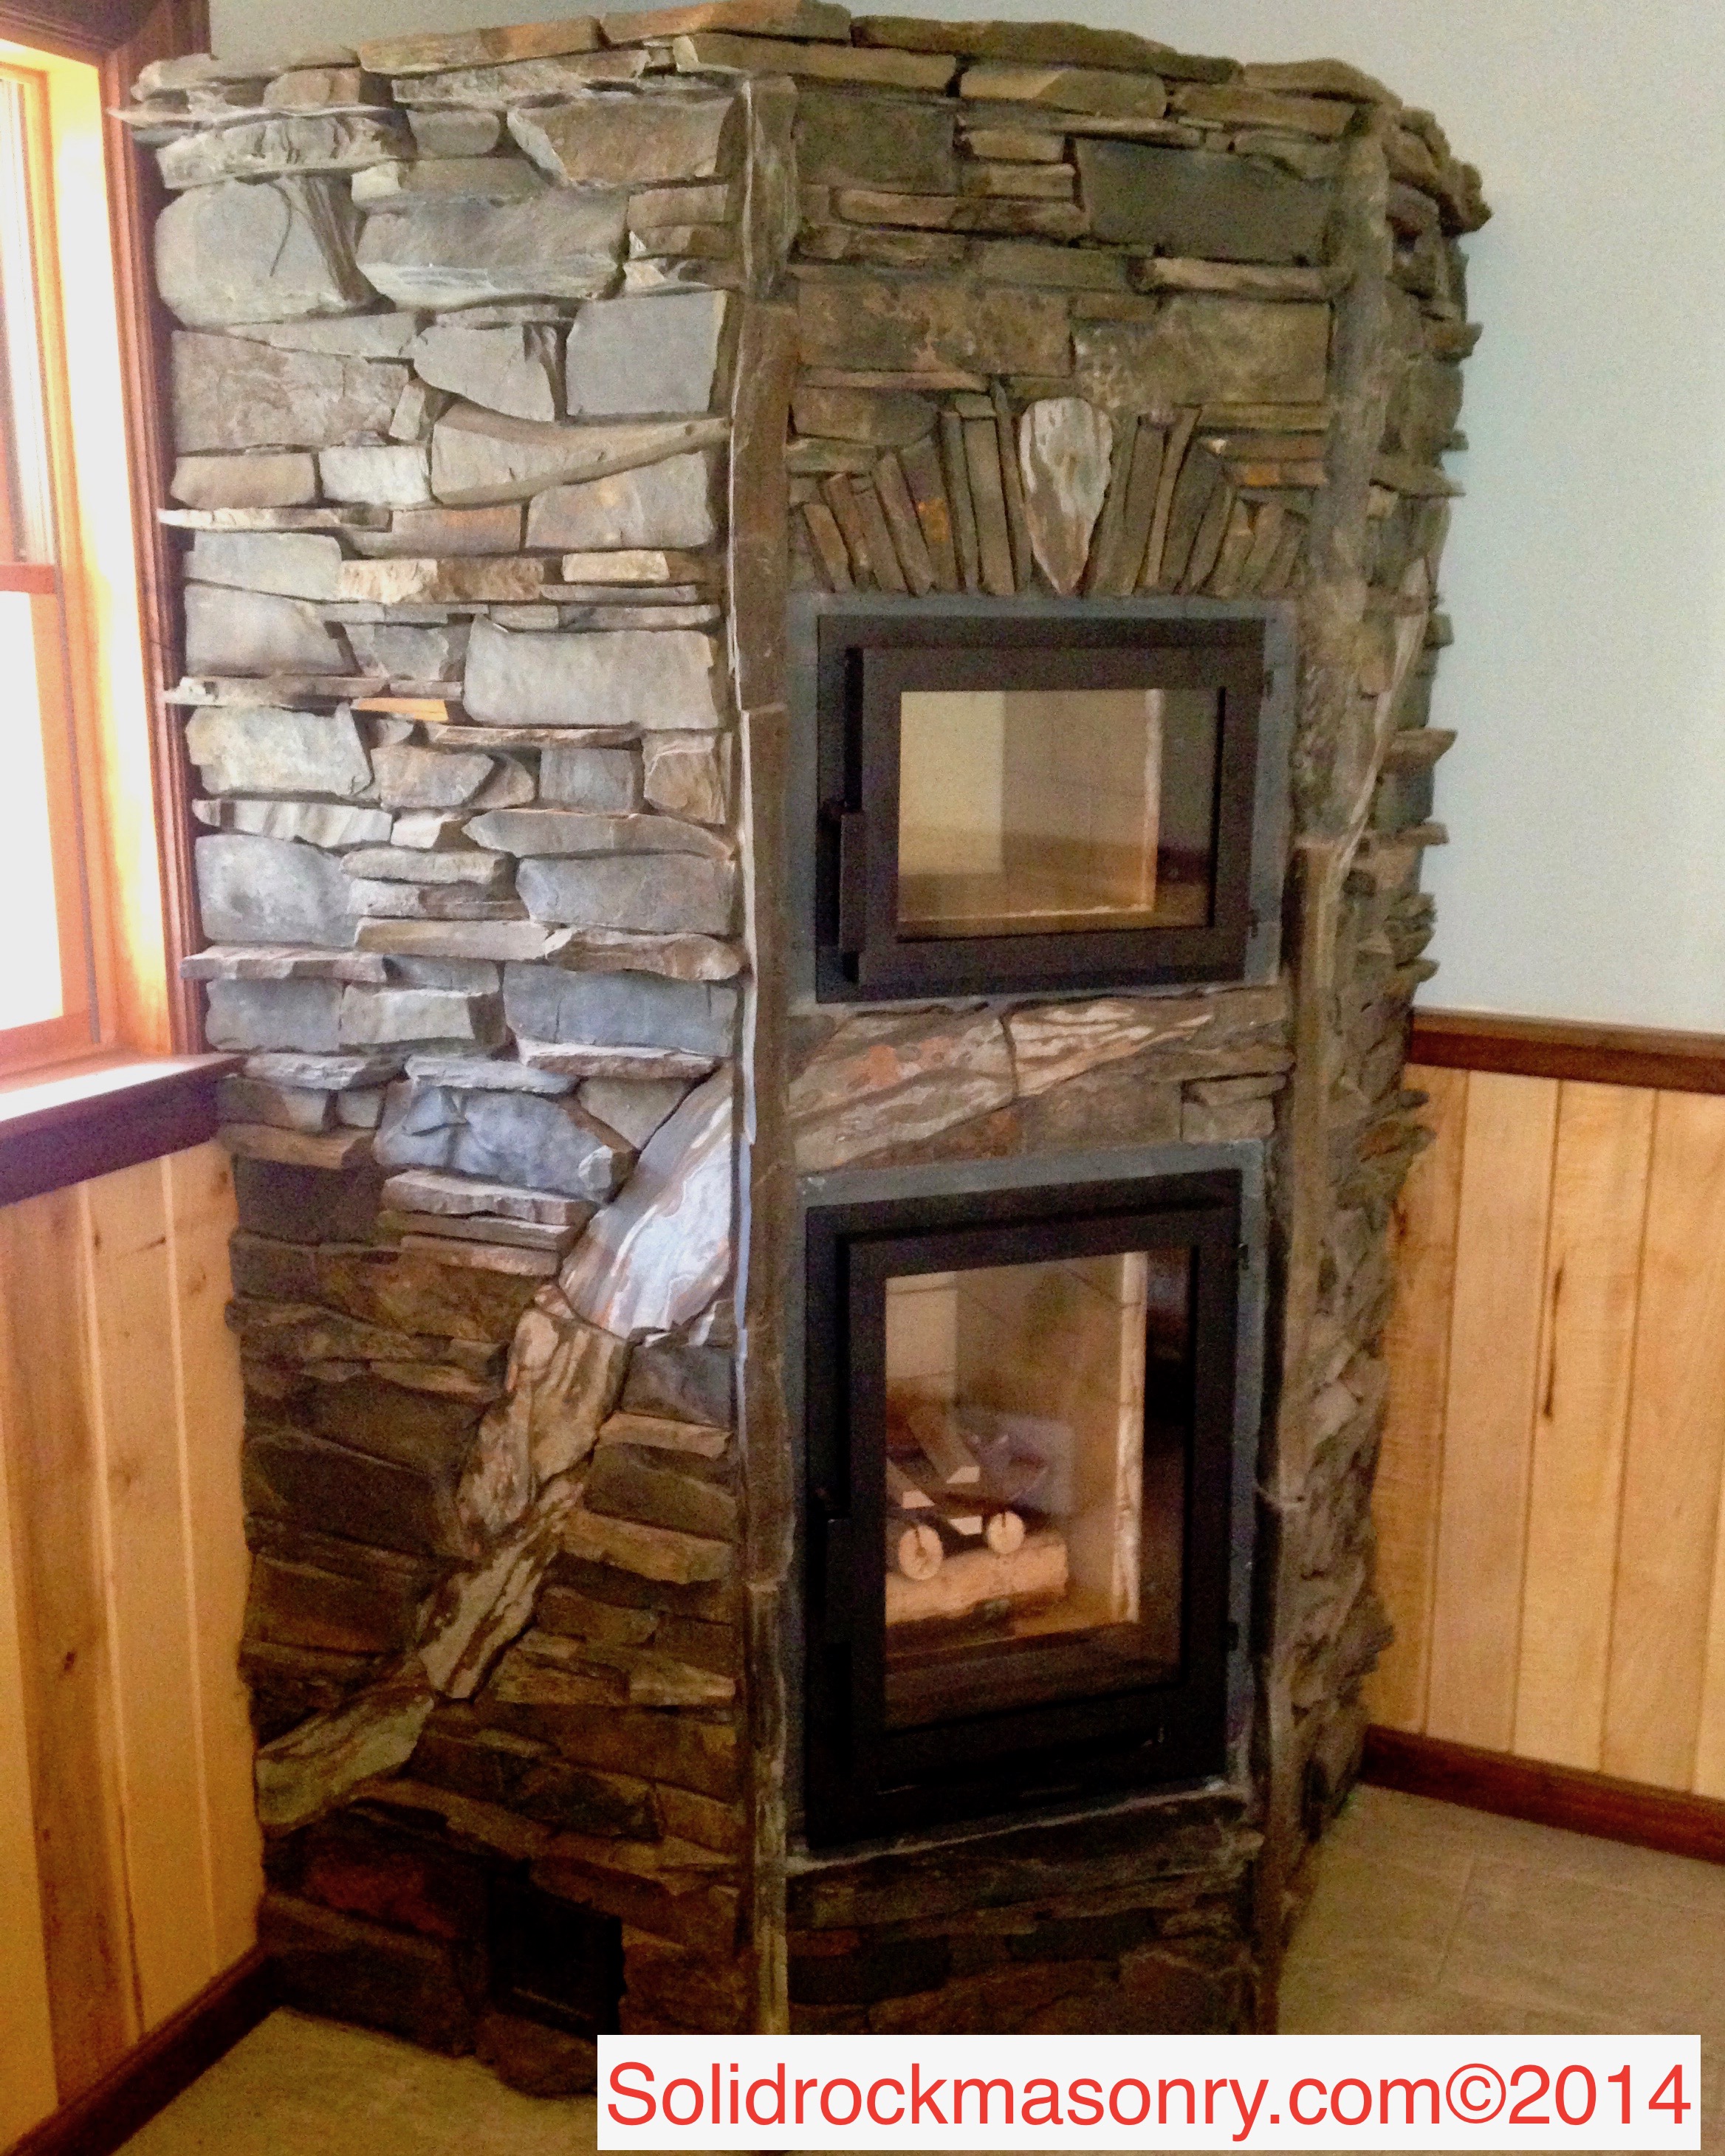 Rogotzke SR-13 corner masonry heater with white oven and heated bench.  Finished with Slate and a band of taconite stone tile.